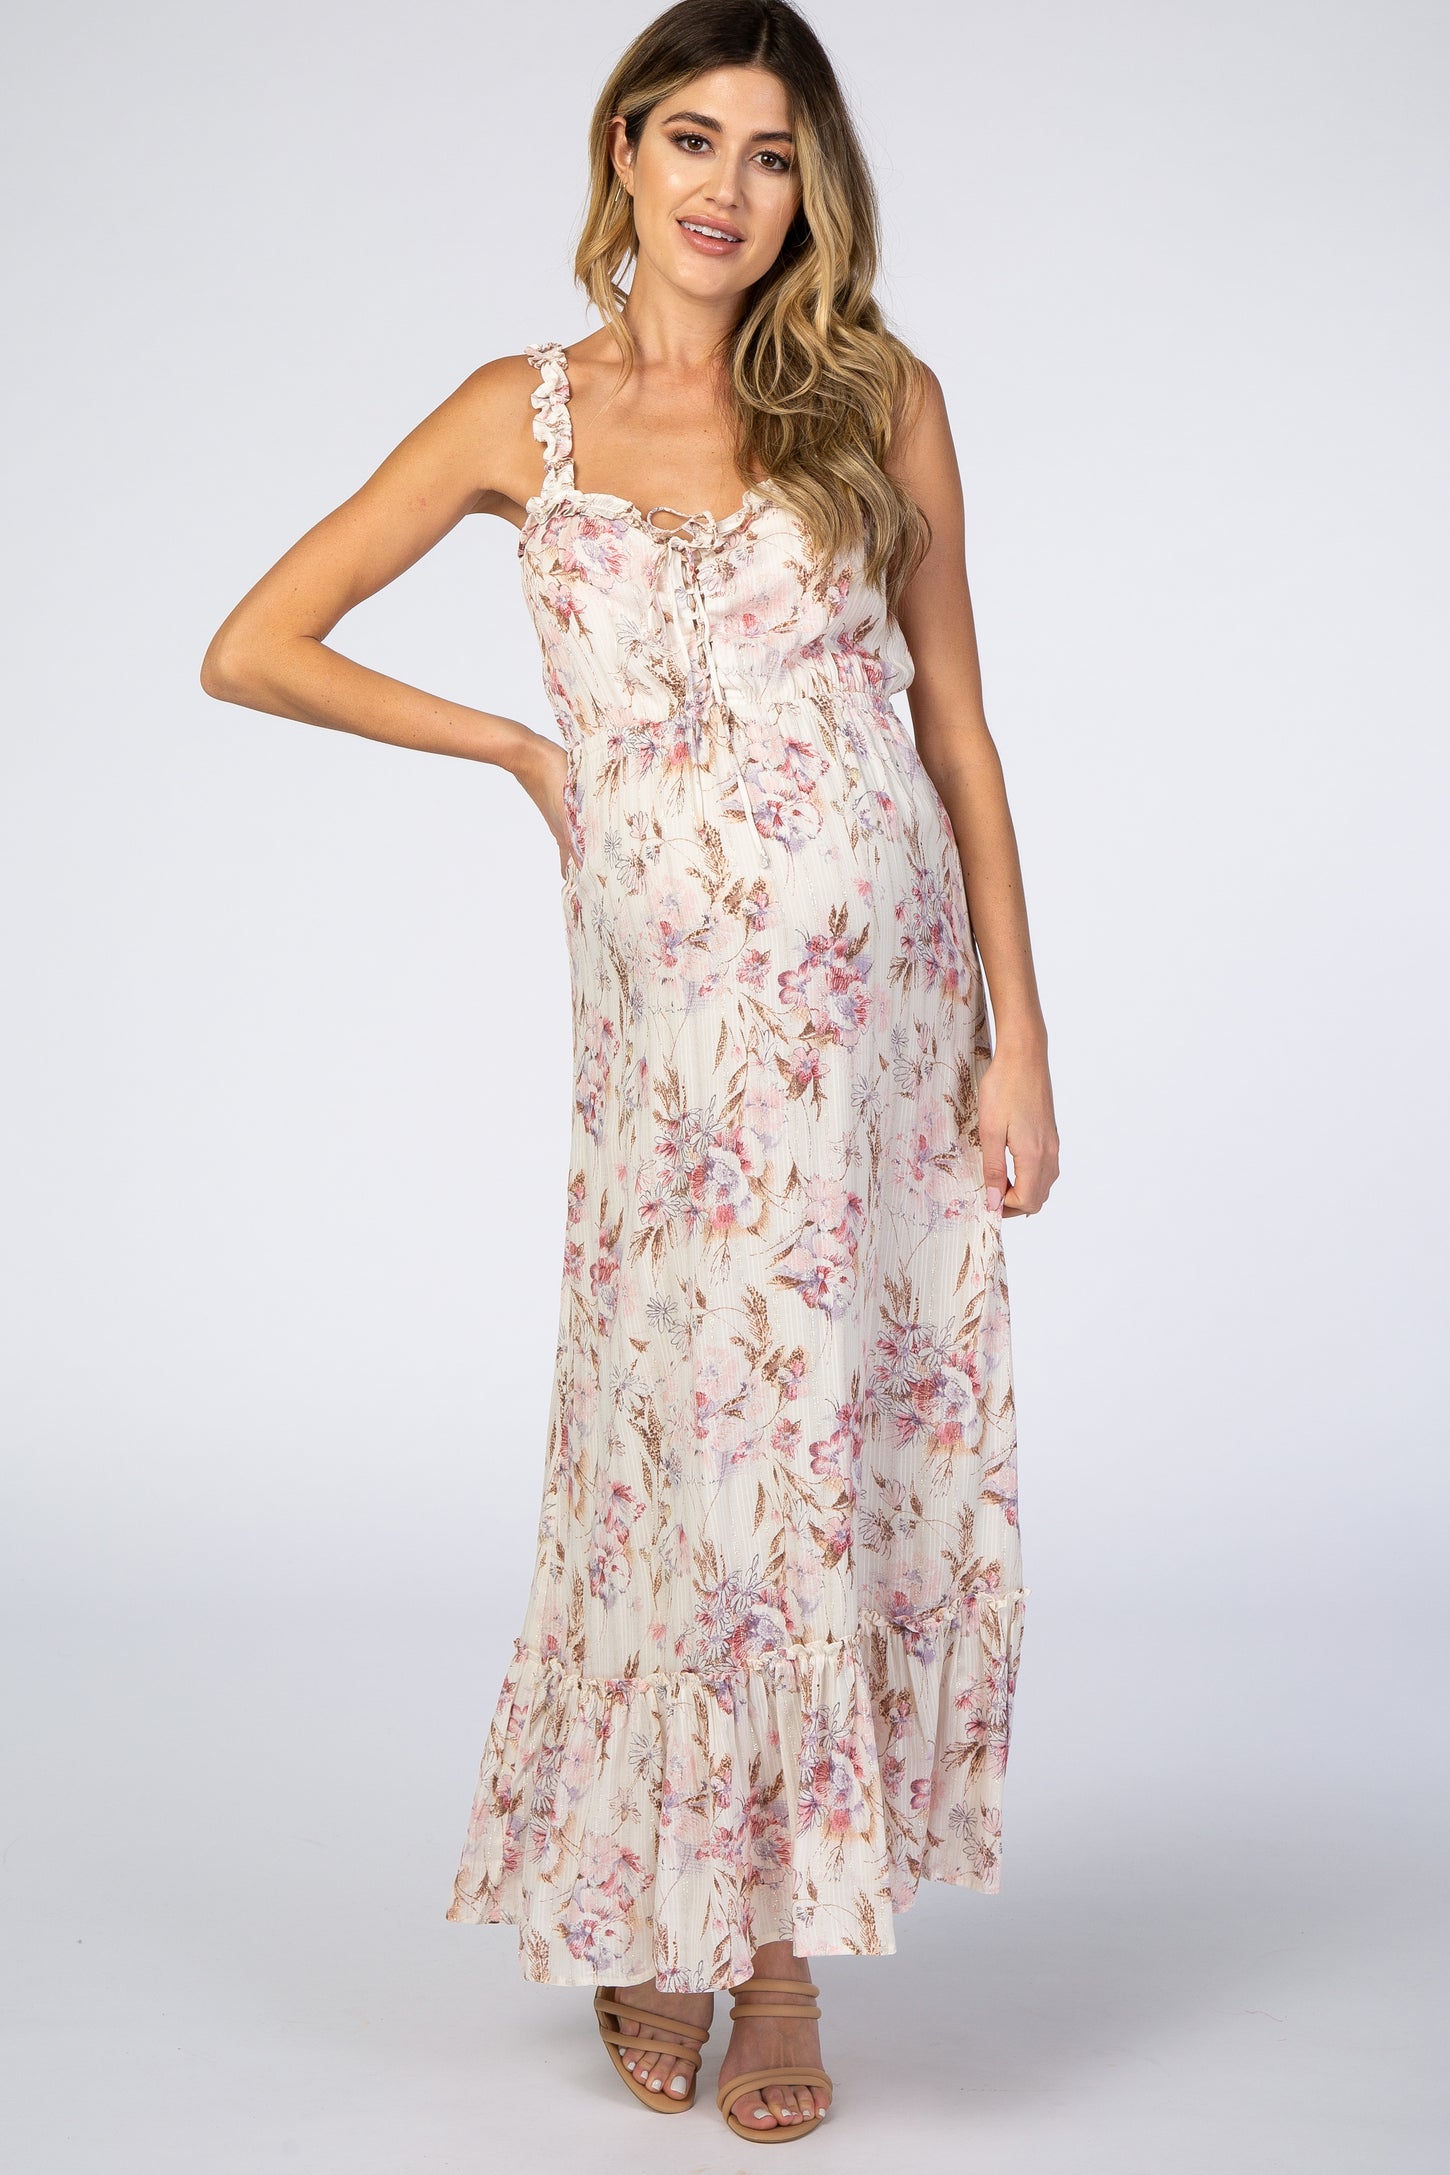 Cream Floral Shimmer Lace-Up Maternity Maxi Dress– PinkBlush